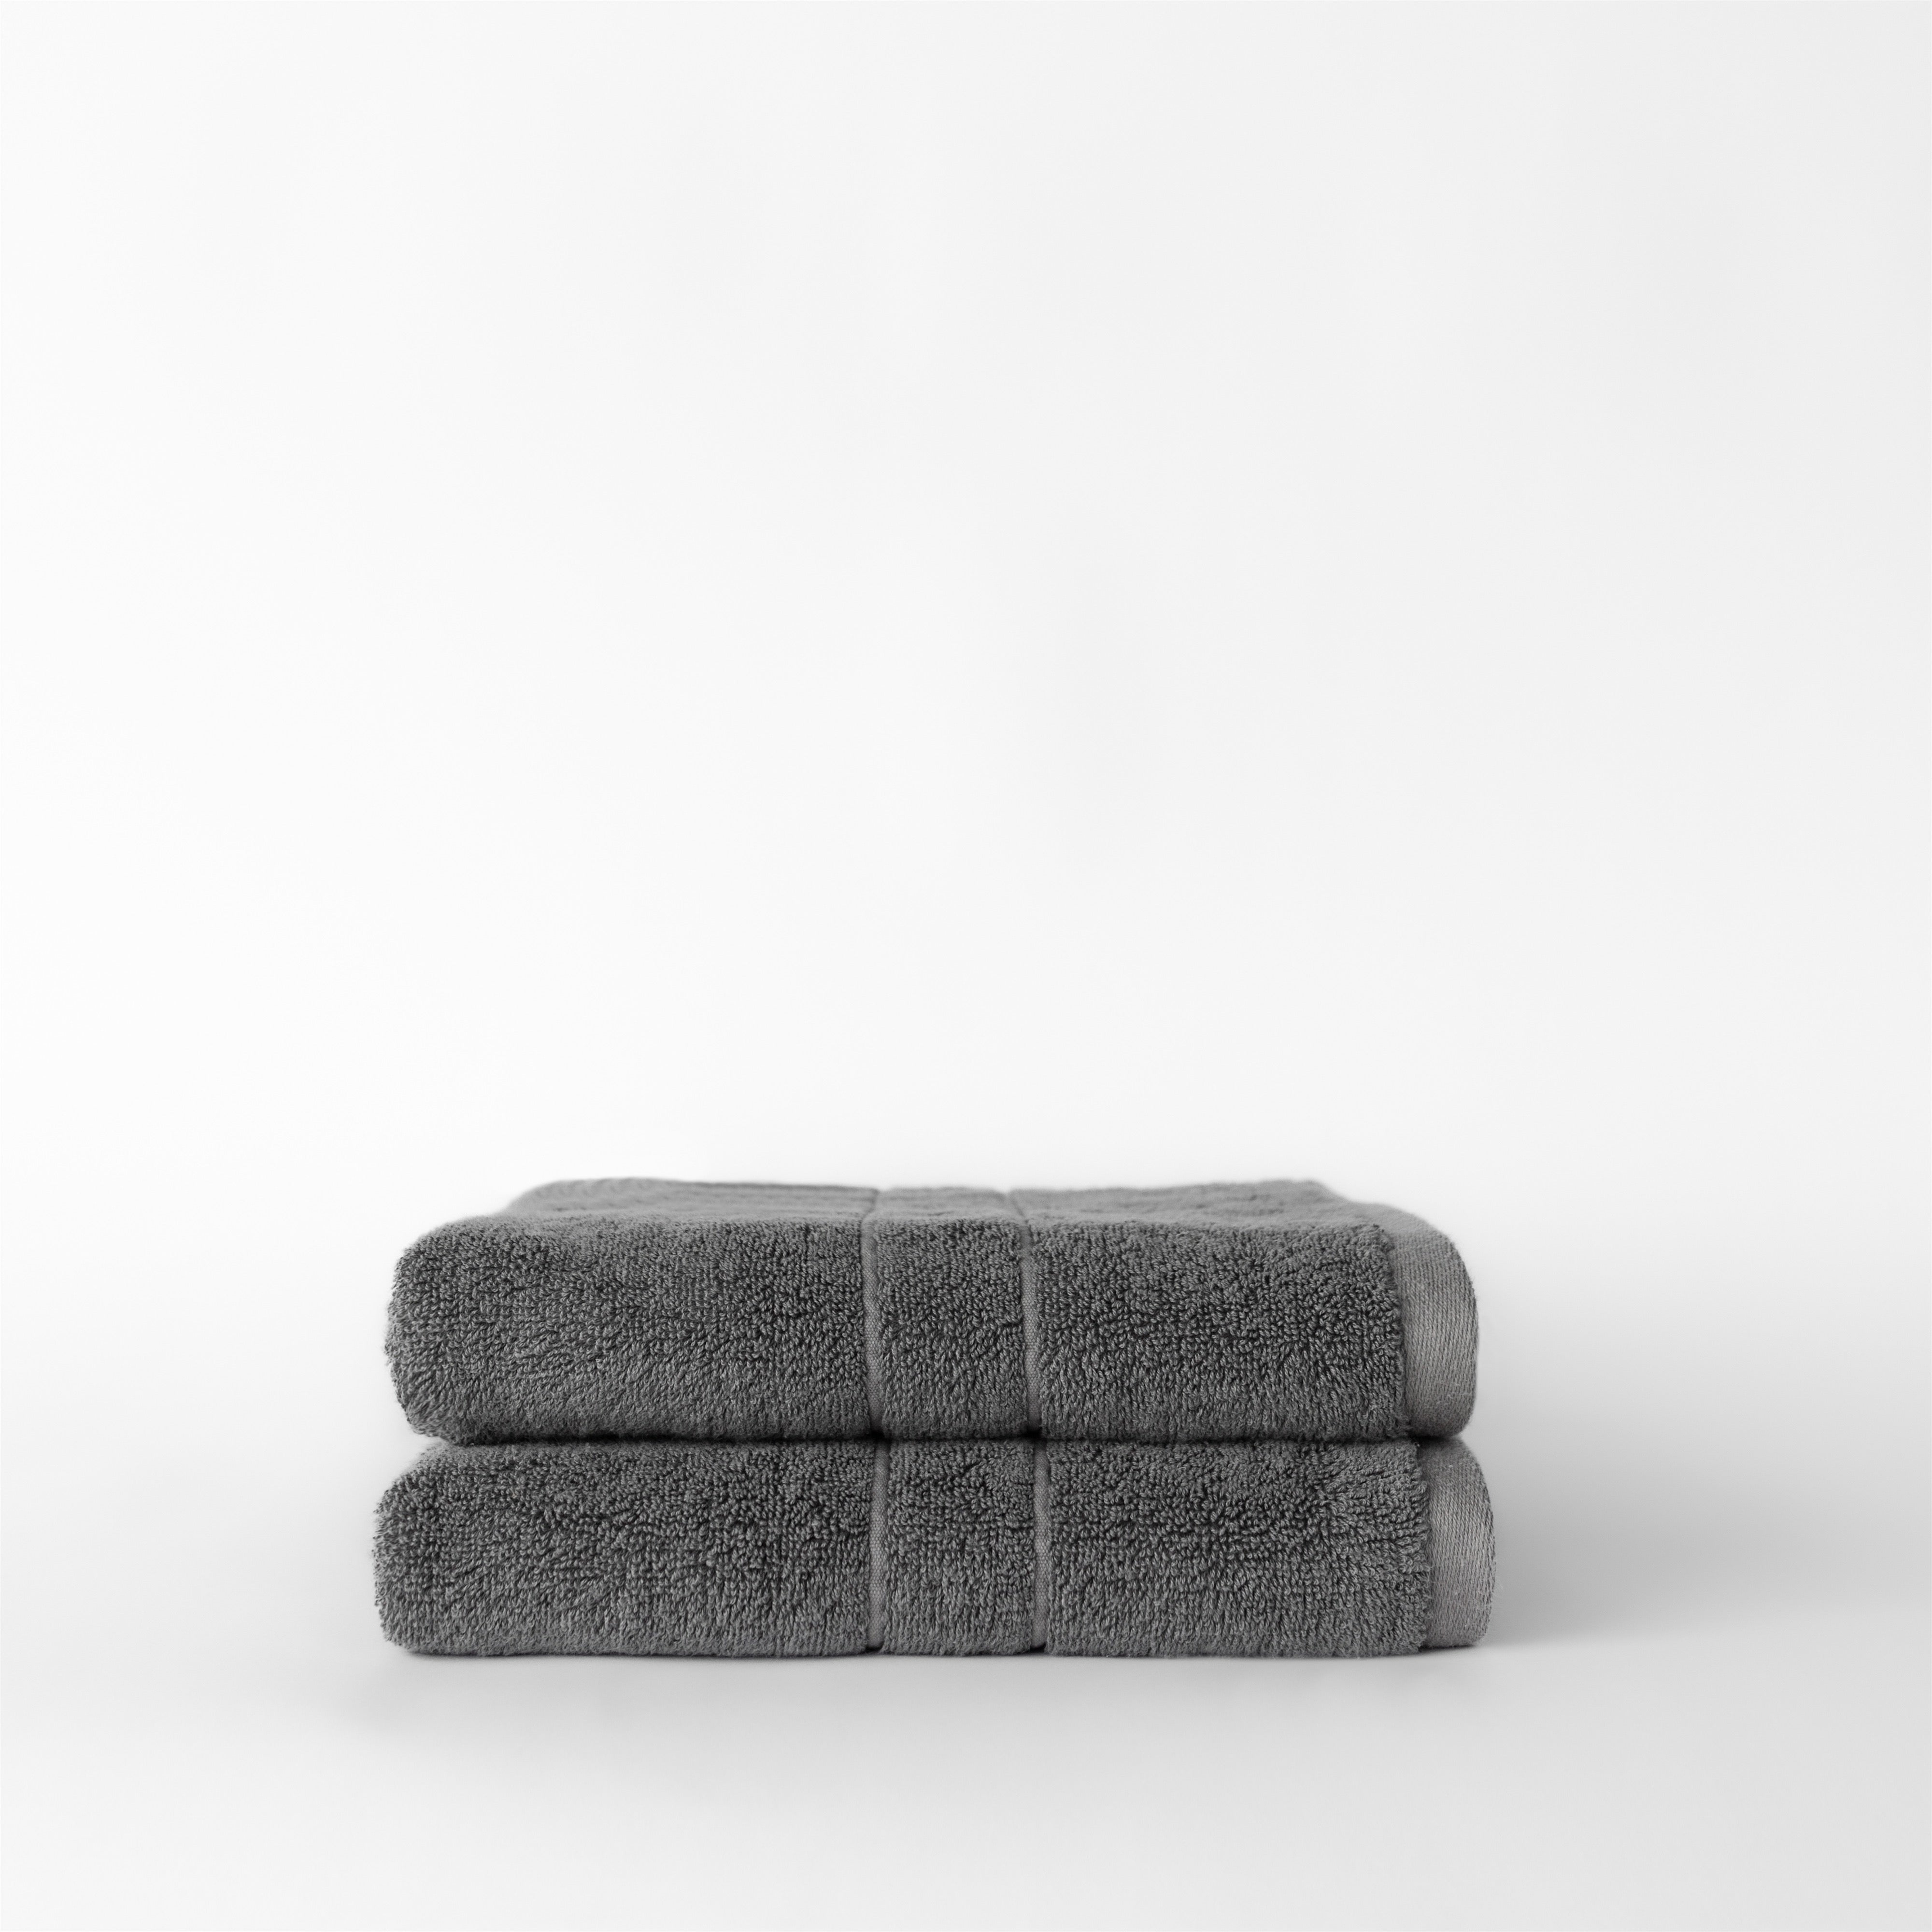 Premium Plush Hand Towels in the color charcoal. Photo of Complete Premium Plush Hand Towel taken with white background |Color:Charcoal